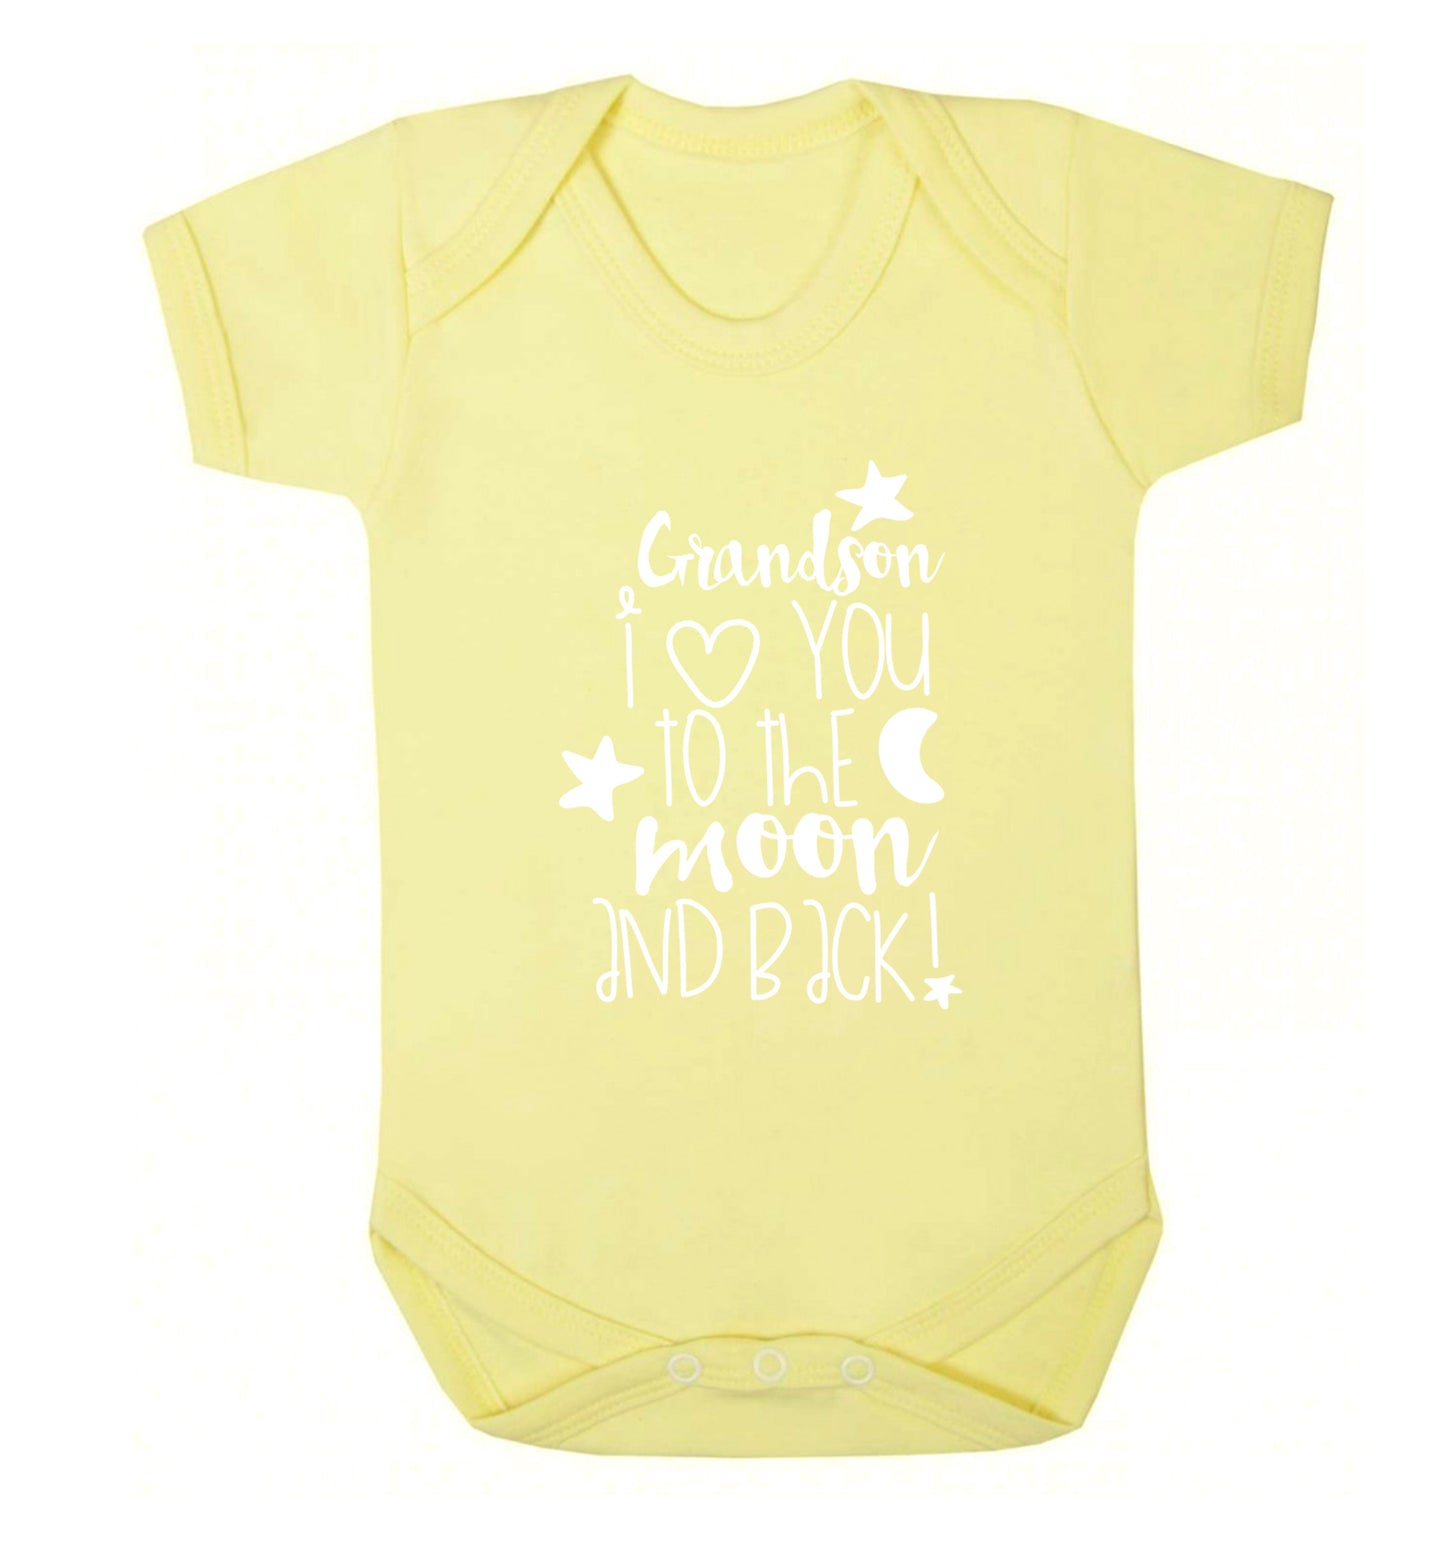 Grandson I love you to the moon and back Baby Vest pale yellow 18-24 months